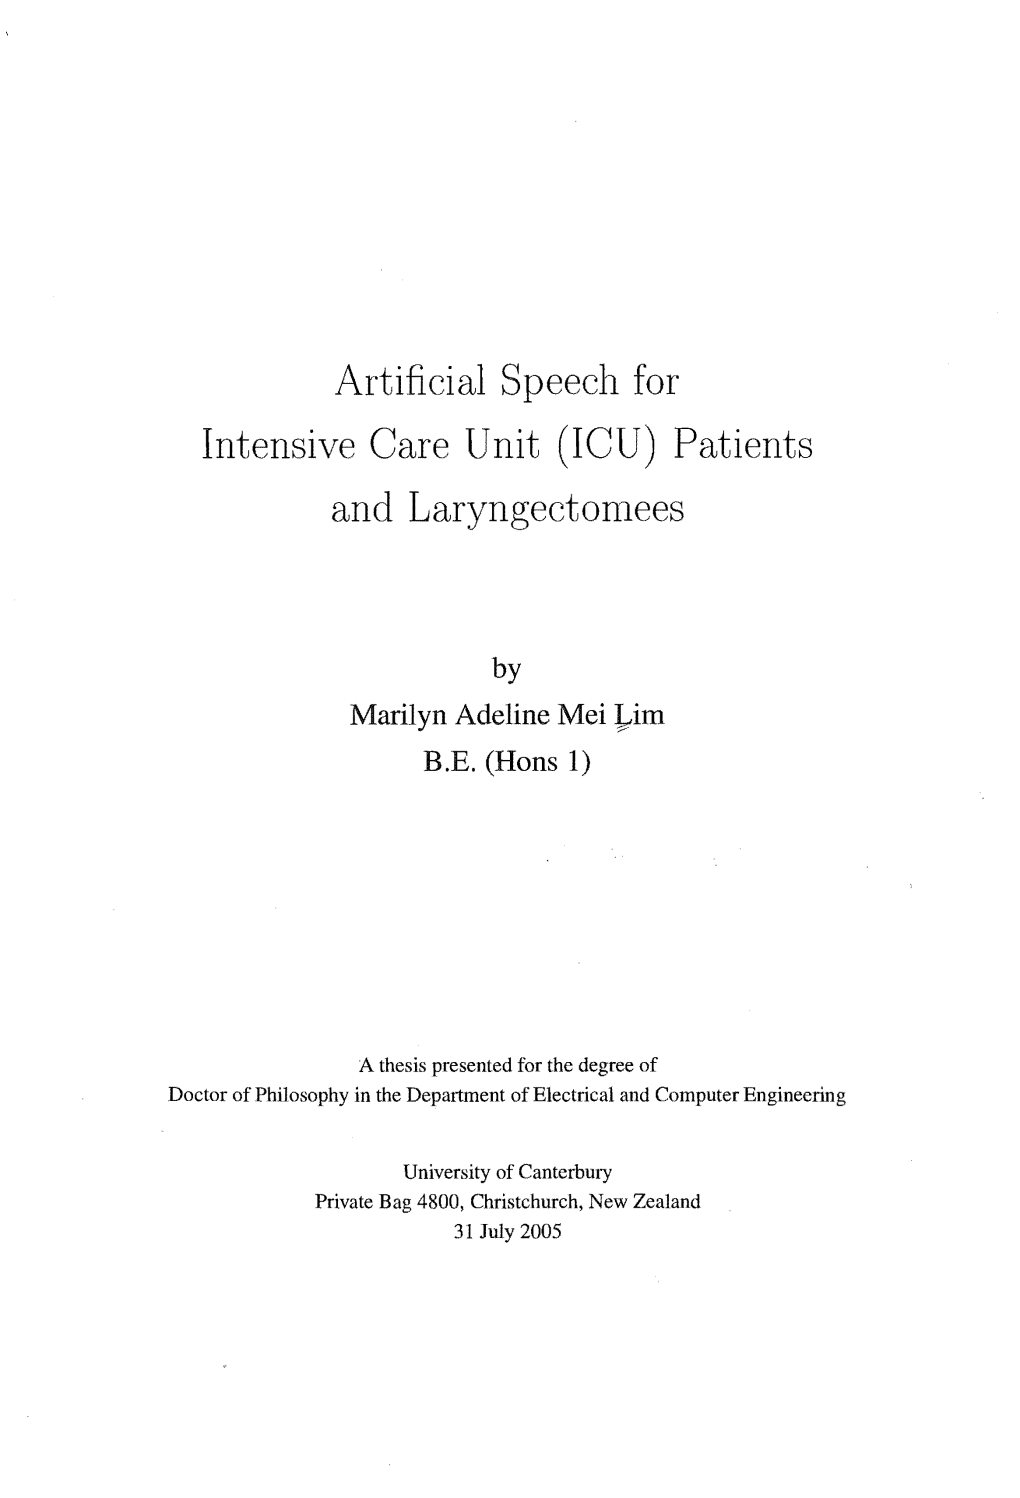 Artificial Speech for Intensive Care Unit (ICU) Patients and Laryngectomees